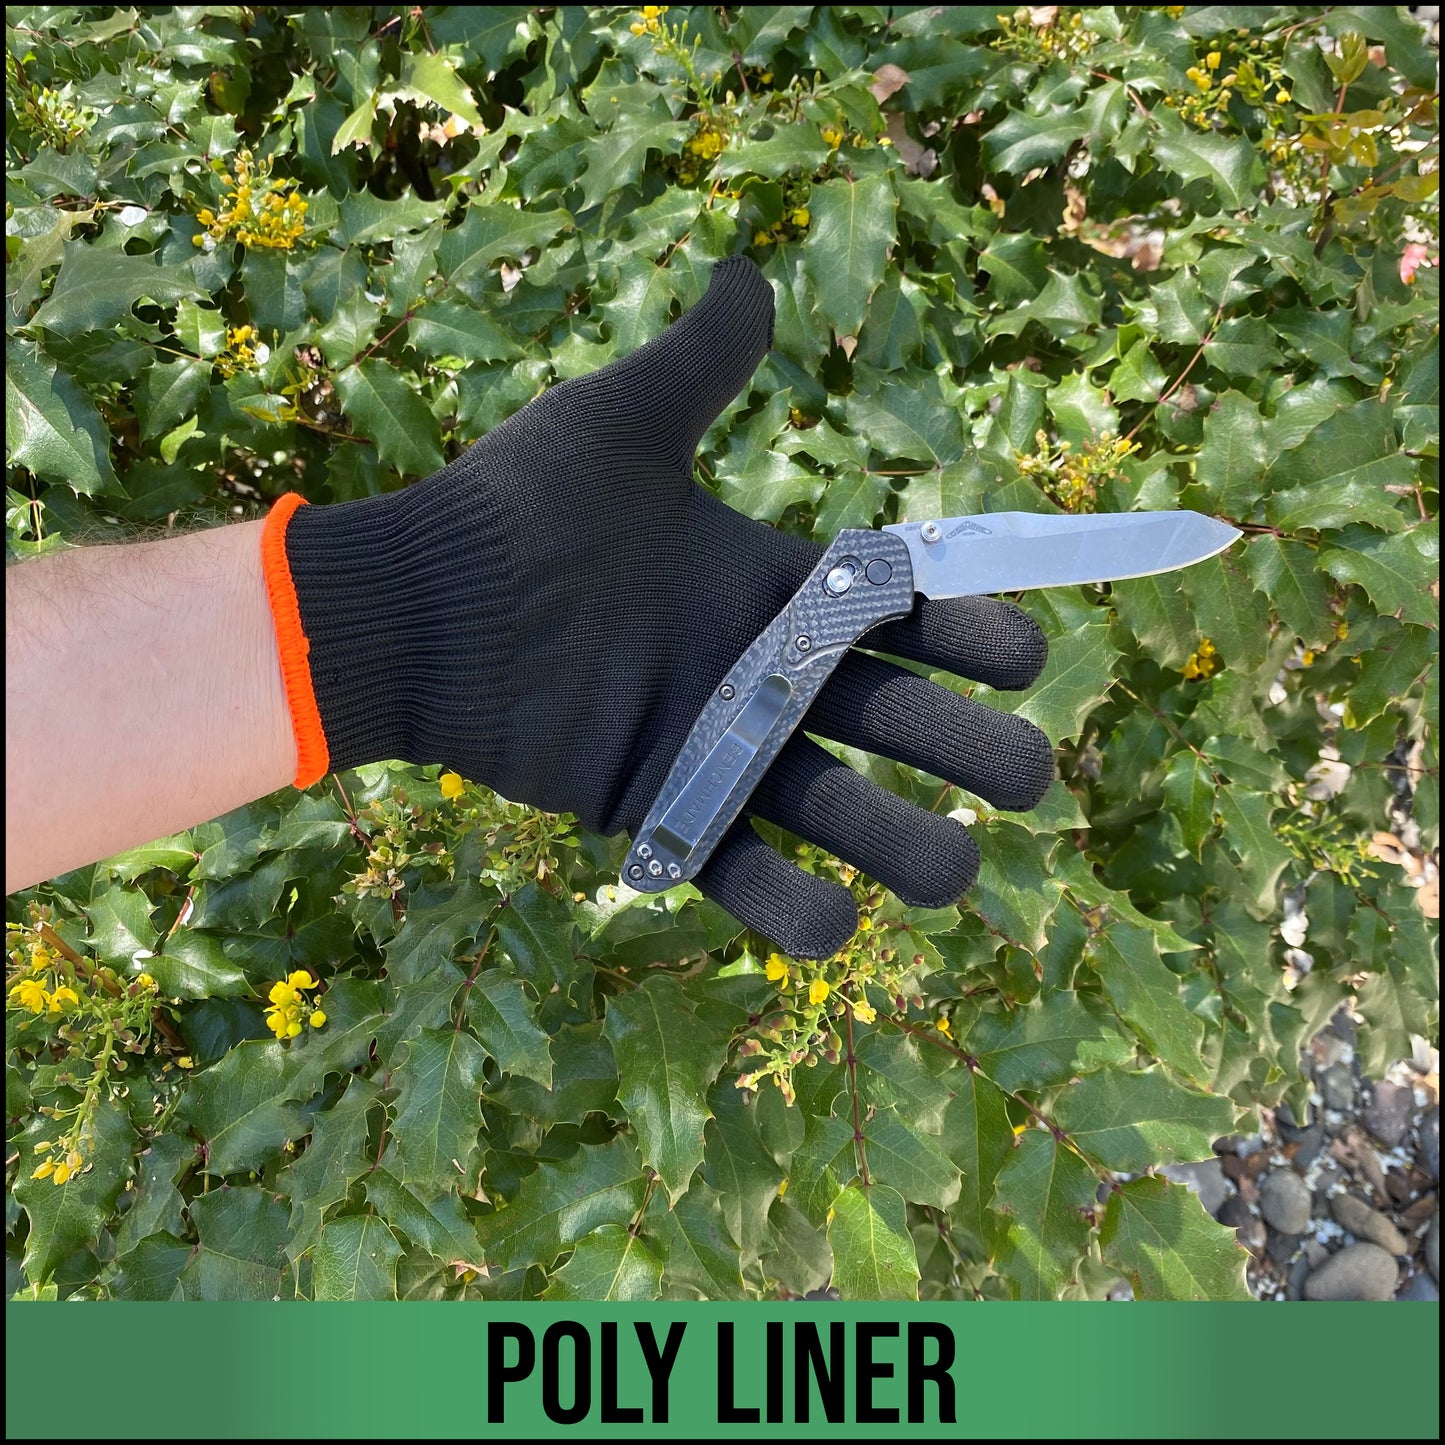  Our Glacier Poly Liner is an excellent choice as an extra layer of warmth. This liner is designed to be used alone or in combination with many Glacier Glove models.